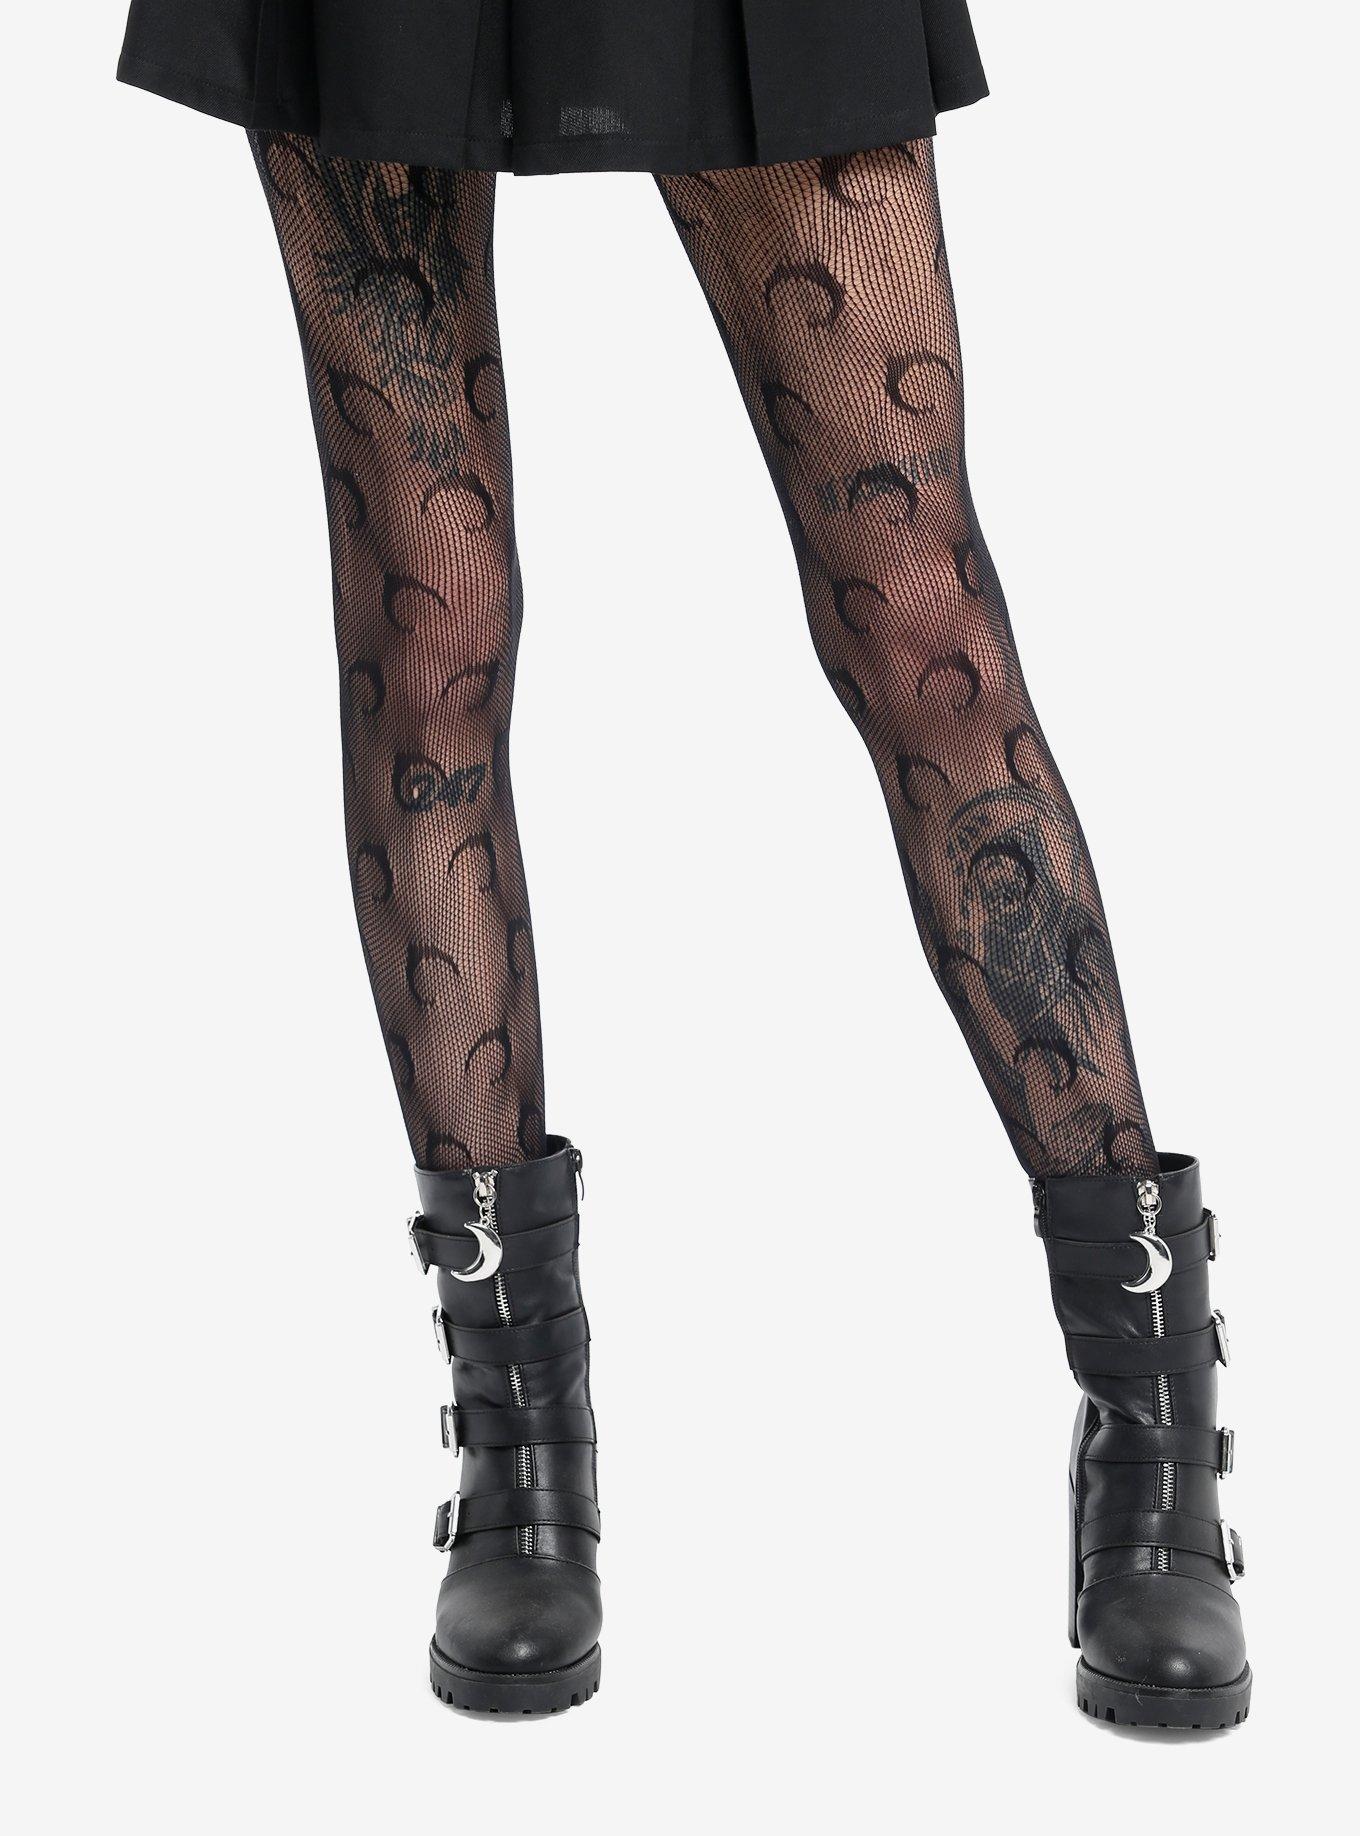 Crescent Black Moon Celestial Moon Fishnet Tights - $10 New With Tags -  From Rachel